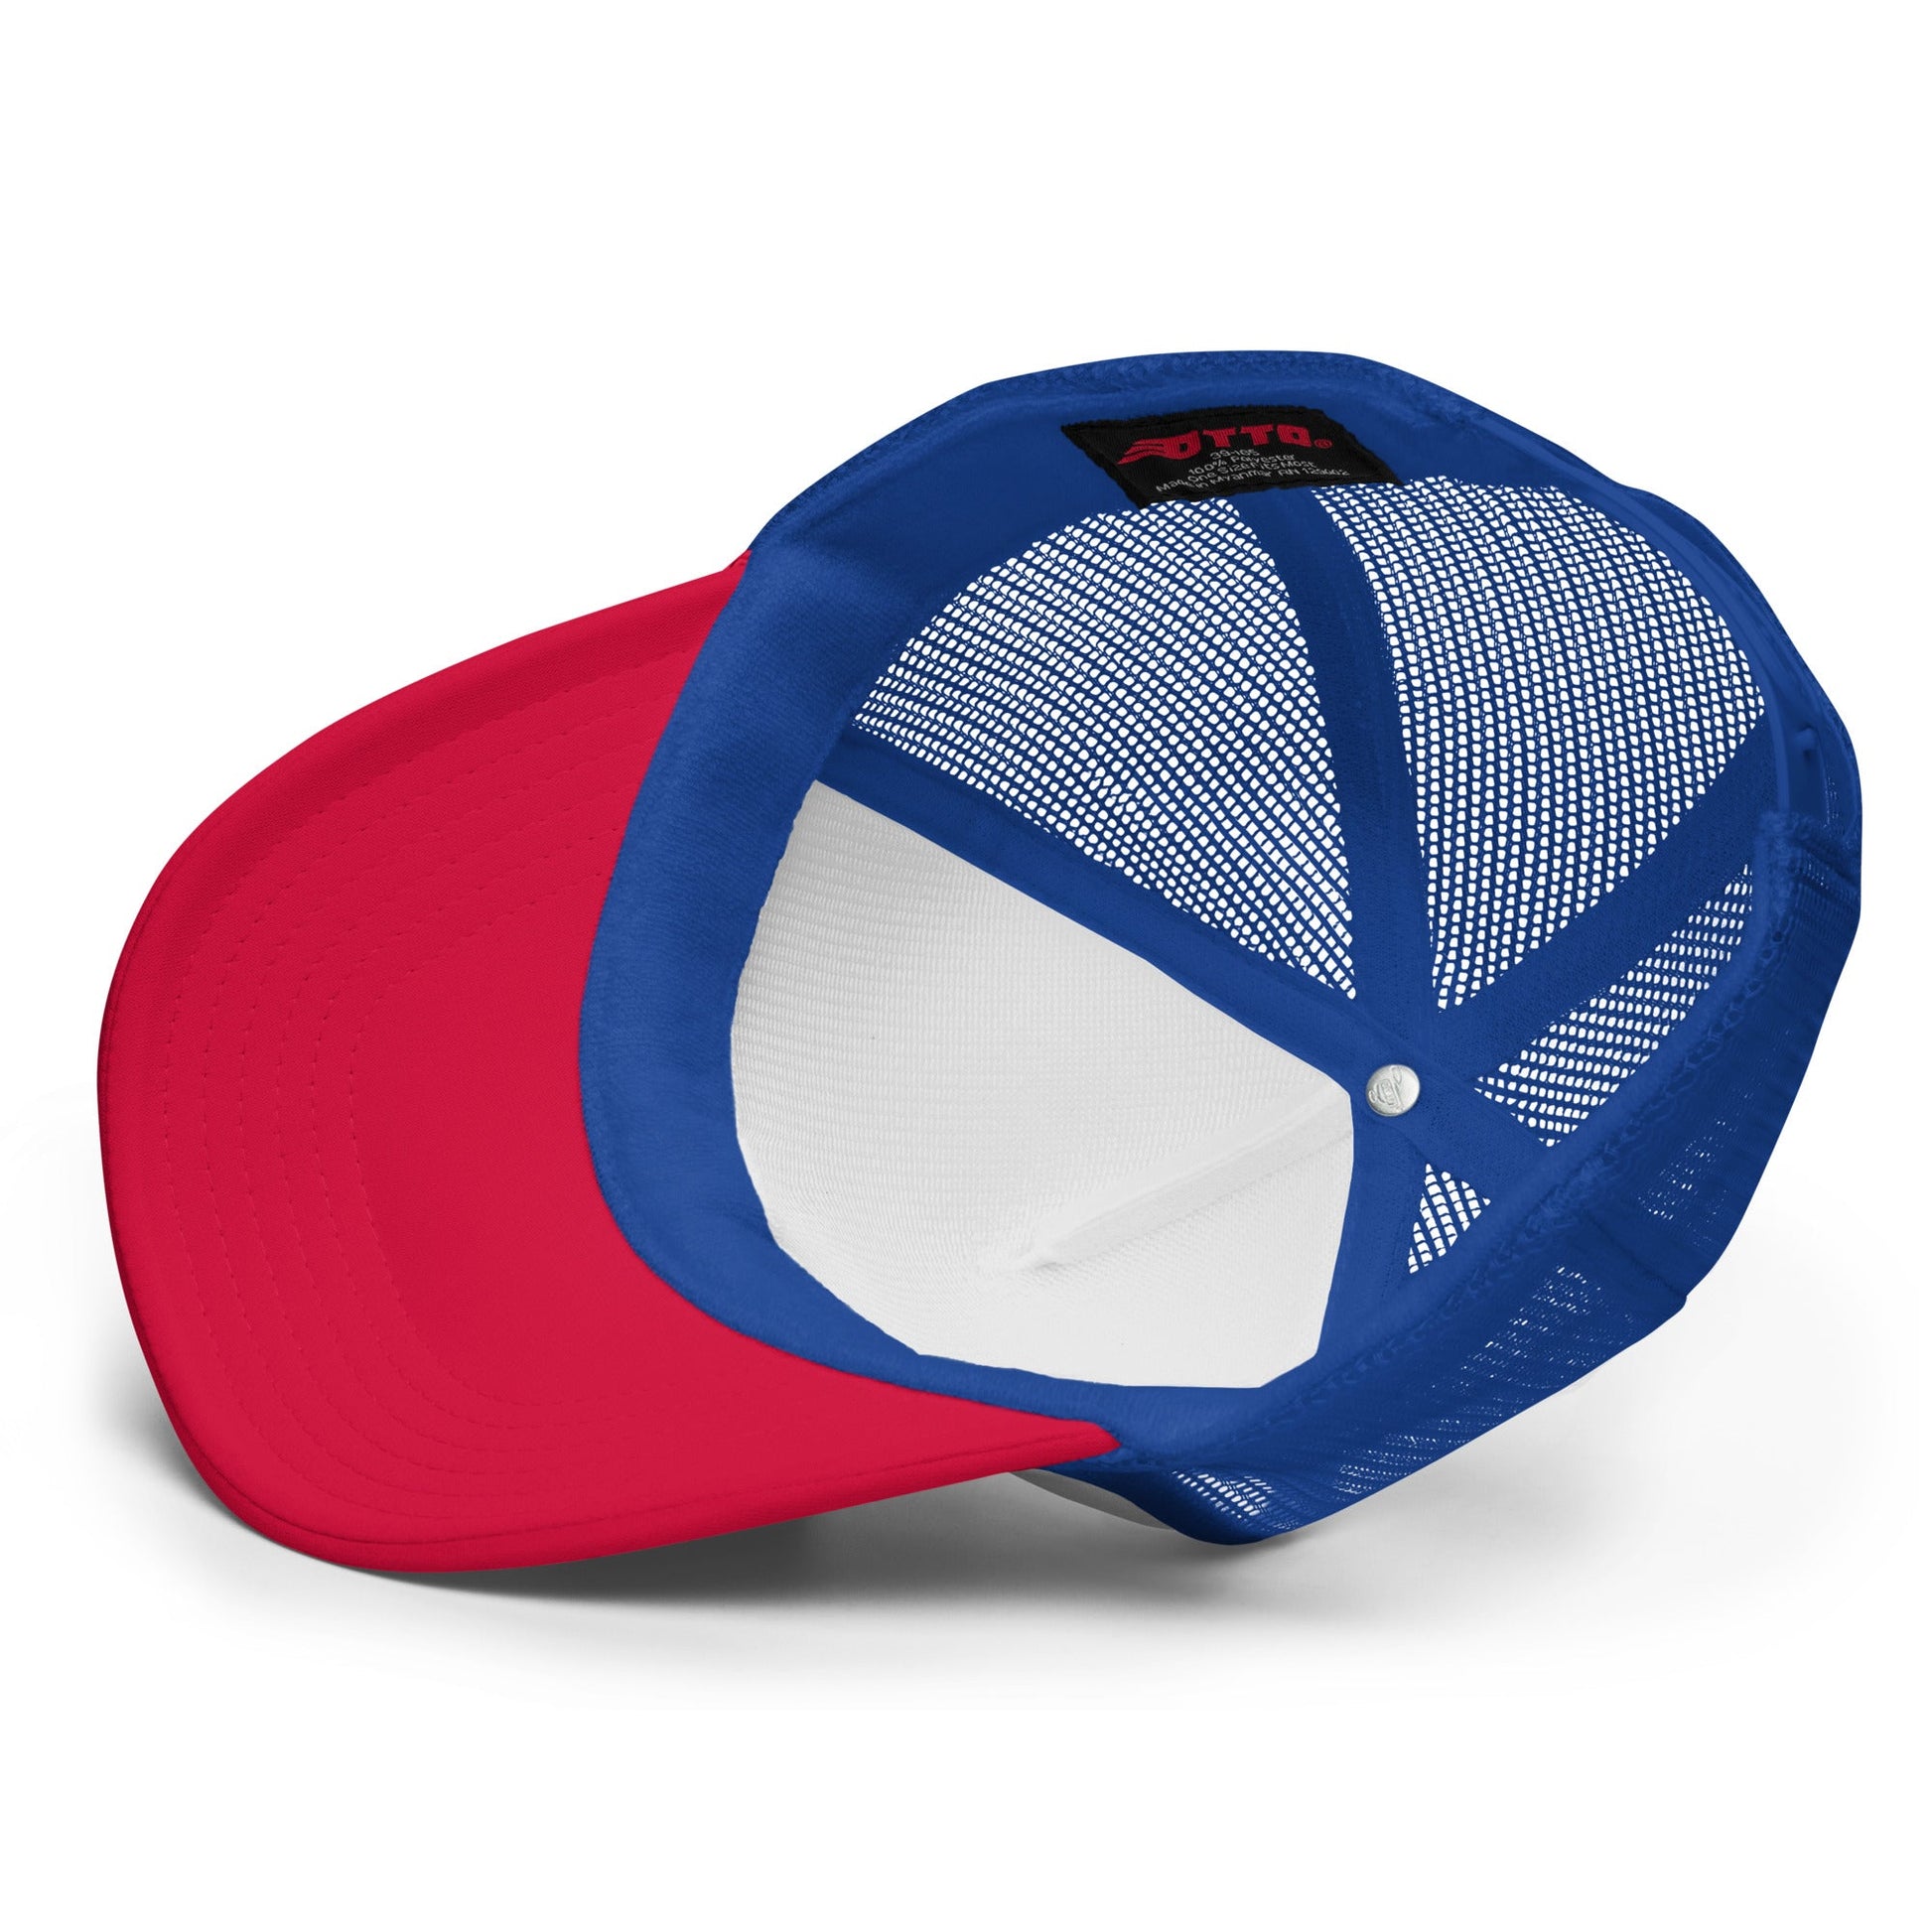 Just Here to Bang 4th of July Funny Foam Trucker Hat Red White Blue